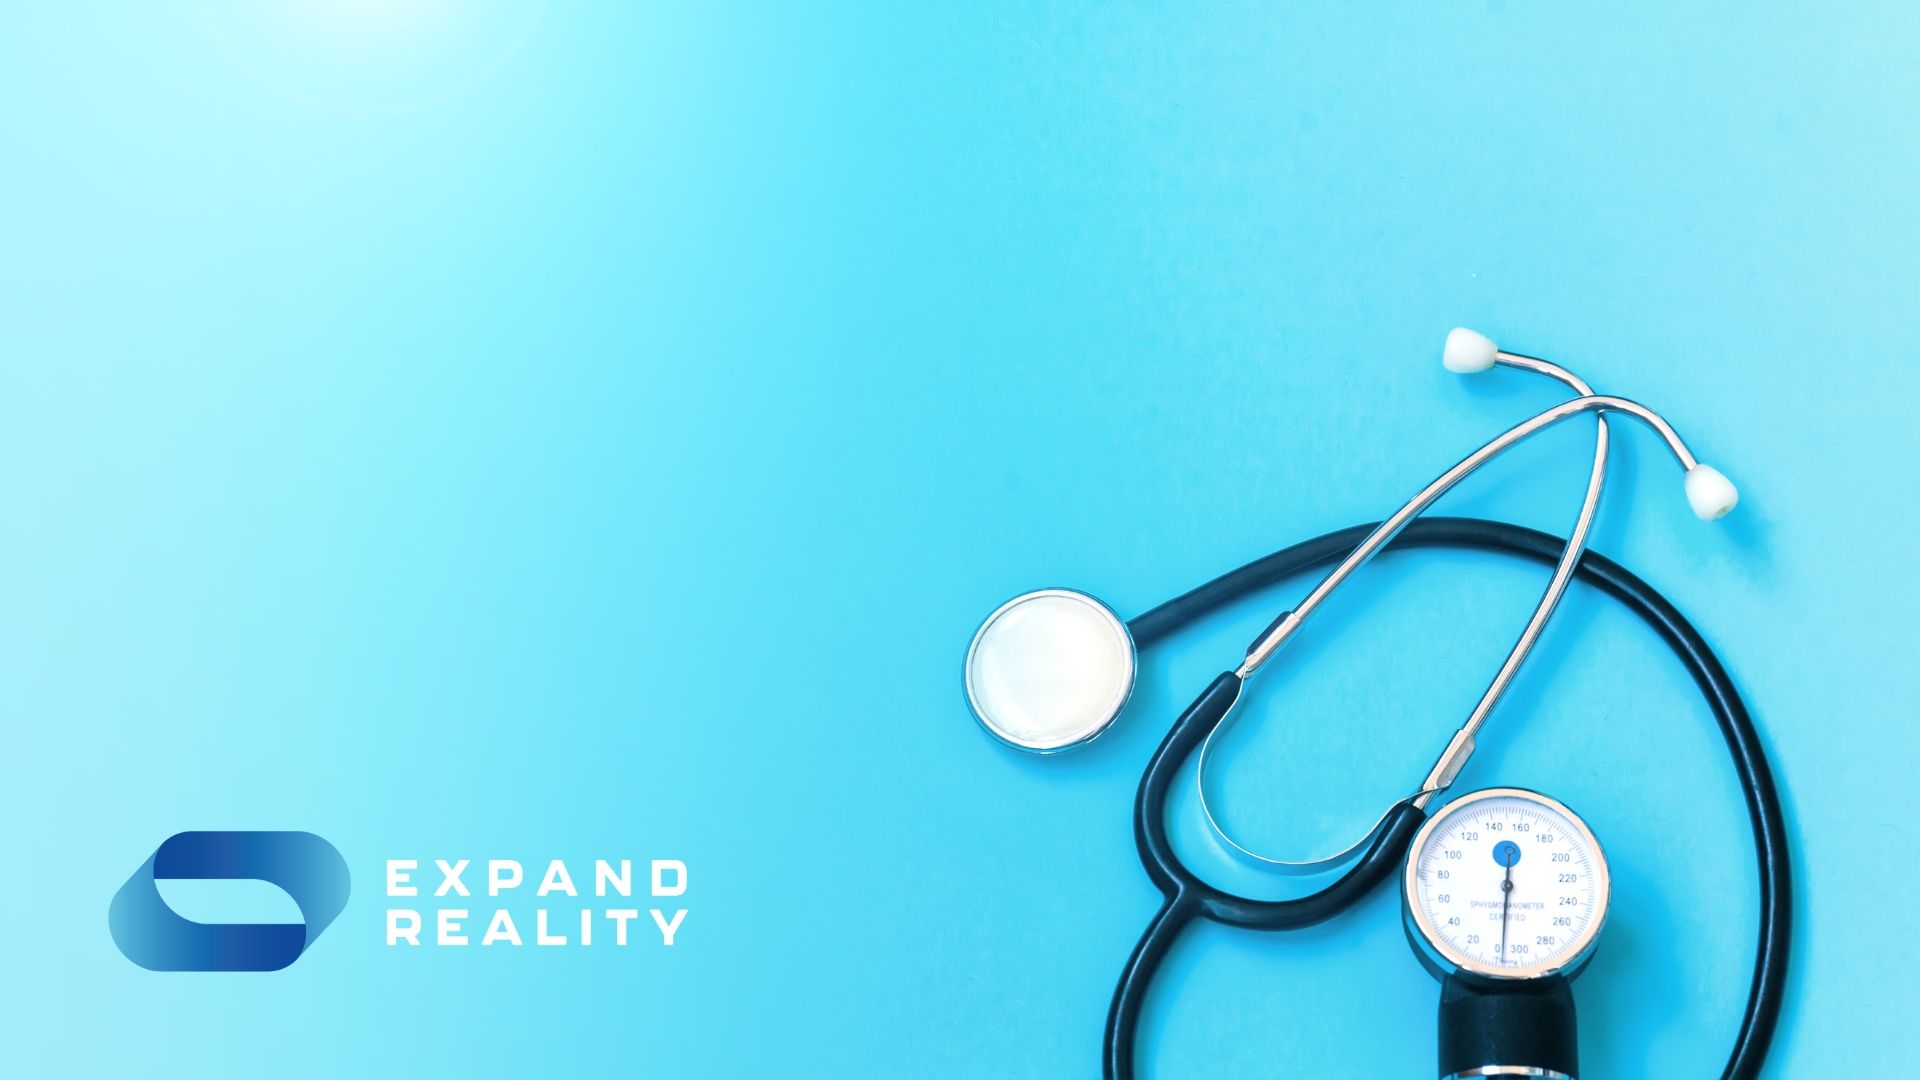 Extended reality is all about gaming, right? In fact, it can be used to save lives in medical settings. Discover more about XR applications in healthcare.